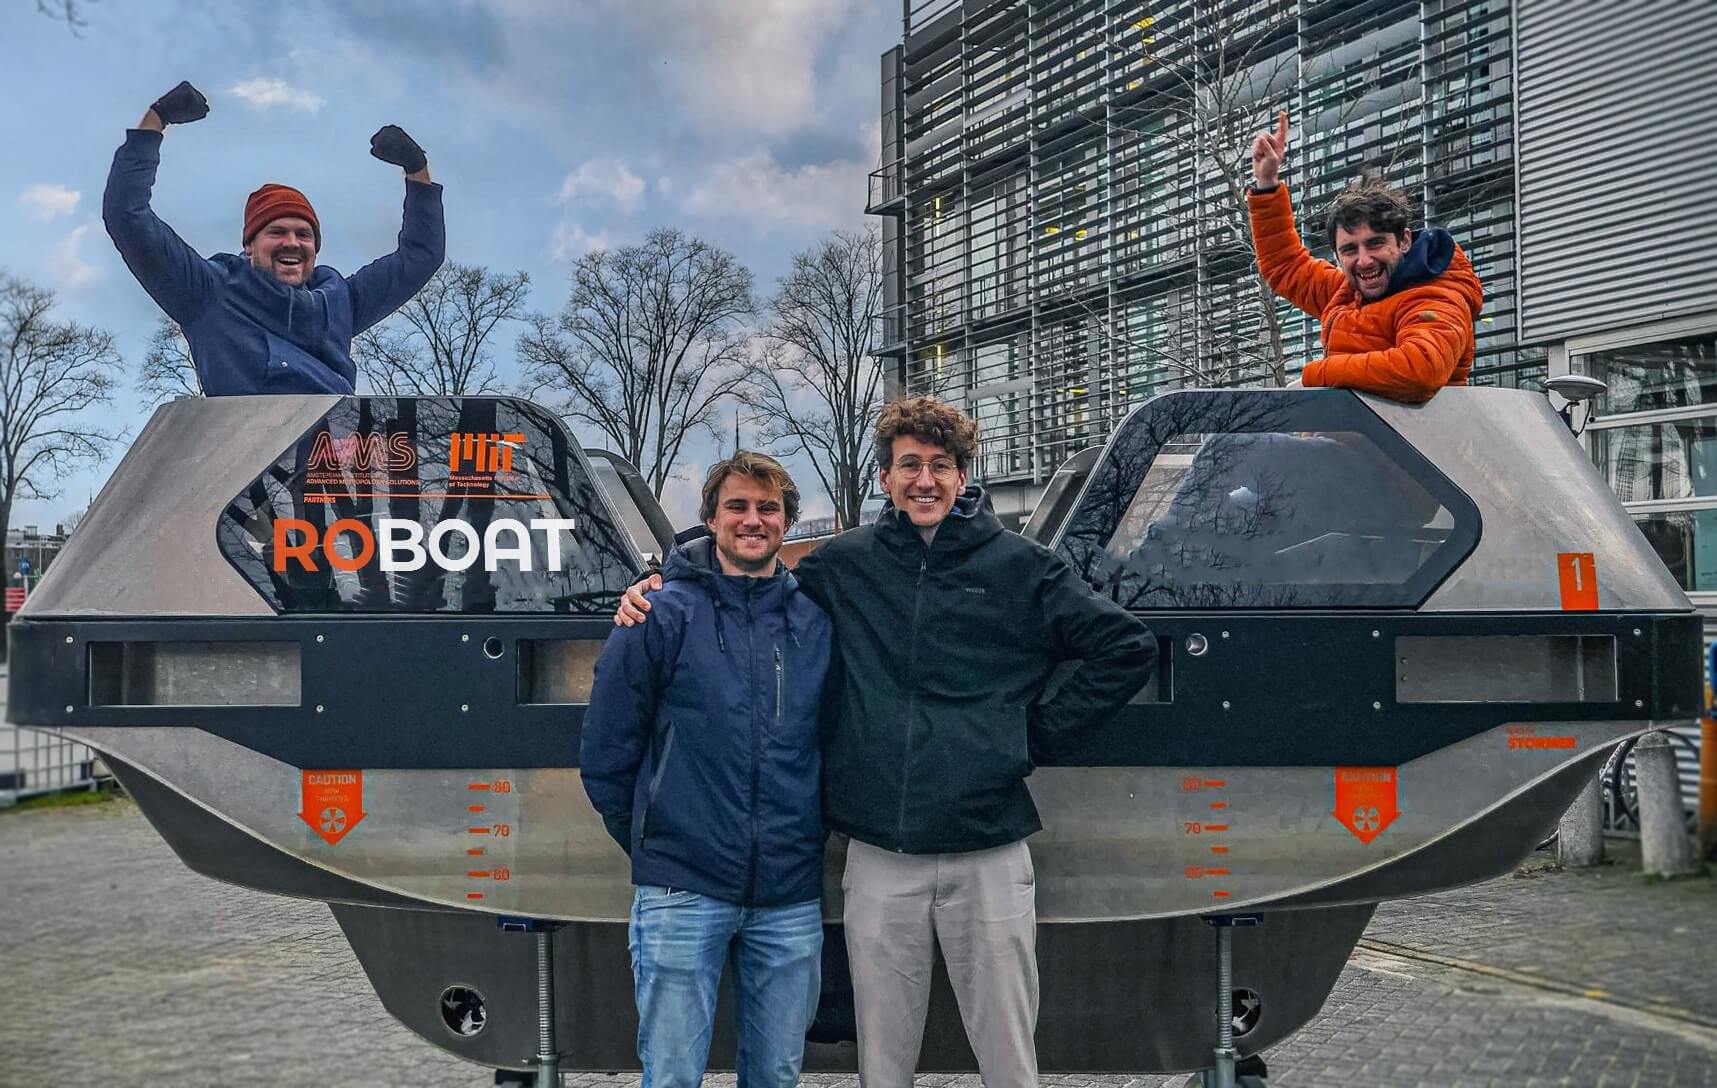 Roboat launches as a spin-off company. It transforms from a research project by MIT and AMS Institute to a startup.